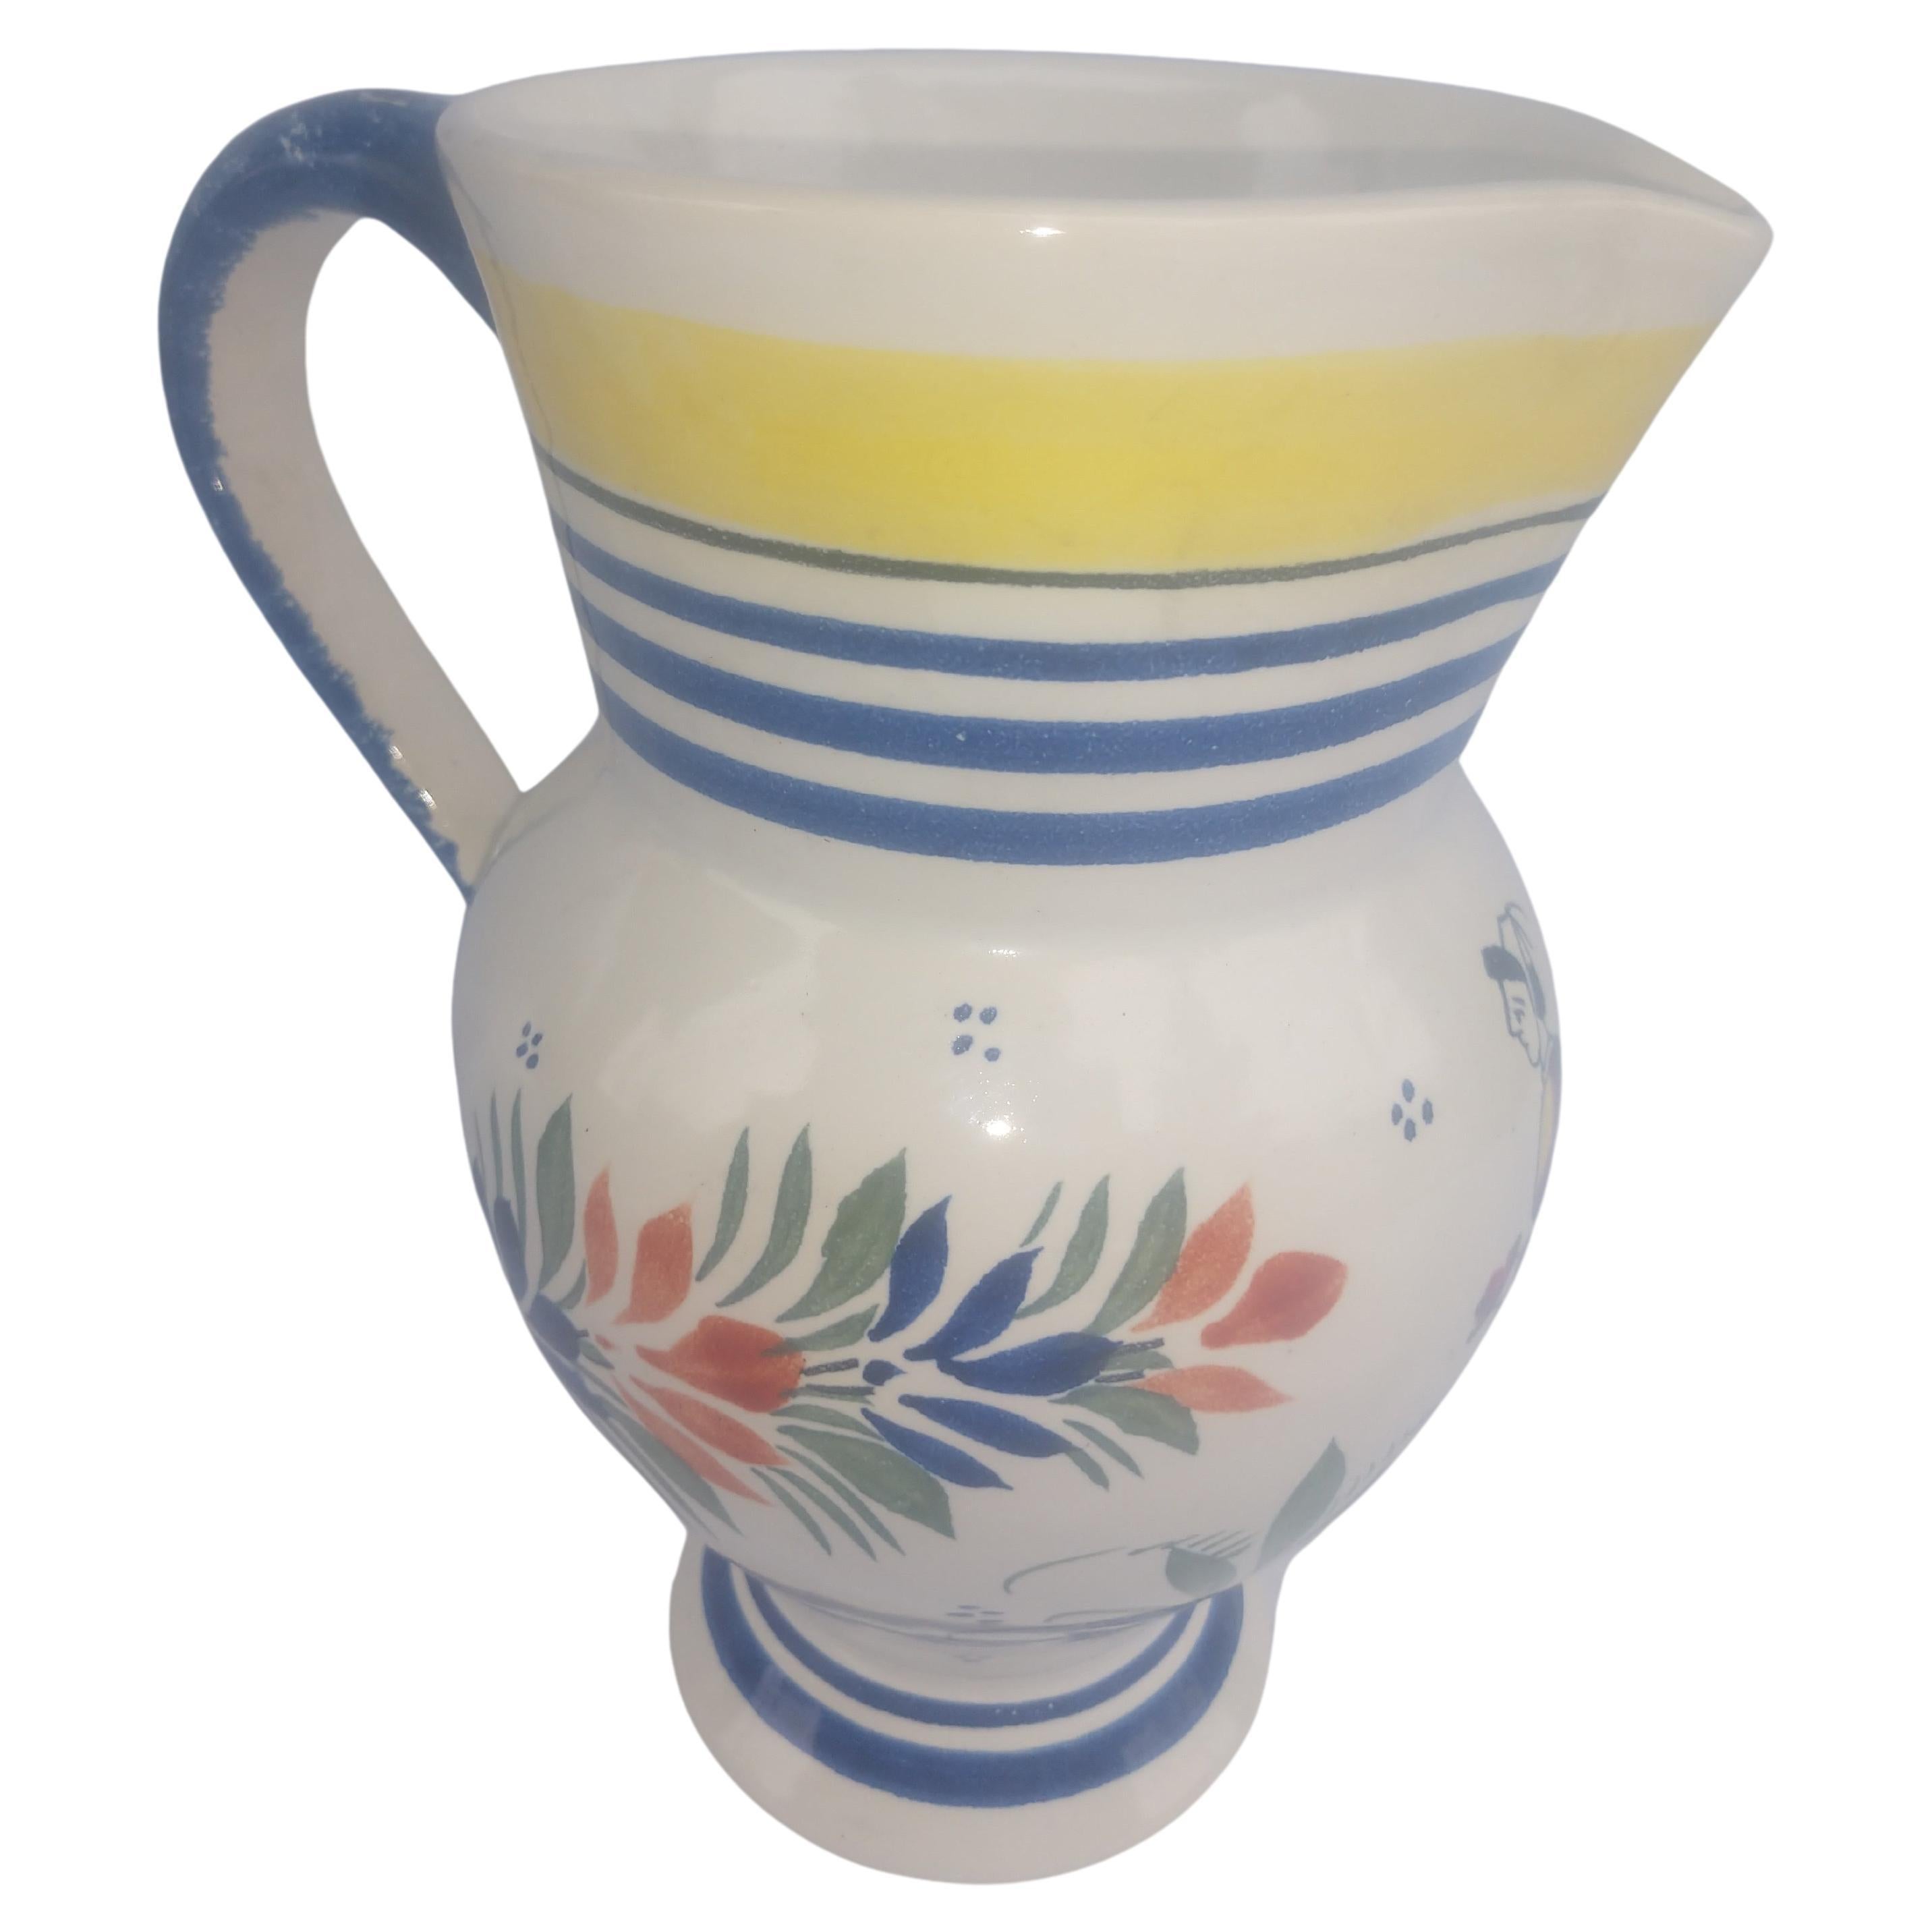 Fabulous hand thrown pitcher from the Henriot Quimper factory in France C1930. Hand decorated and without chips or cracks in excellent vintage condition. Eight inches tall with a generous handle. Beautifully executed shape. We have smaller sizes